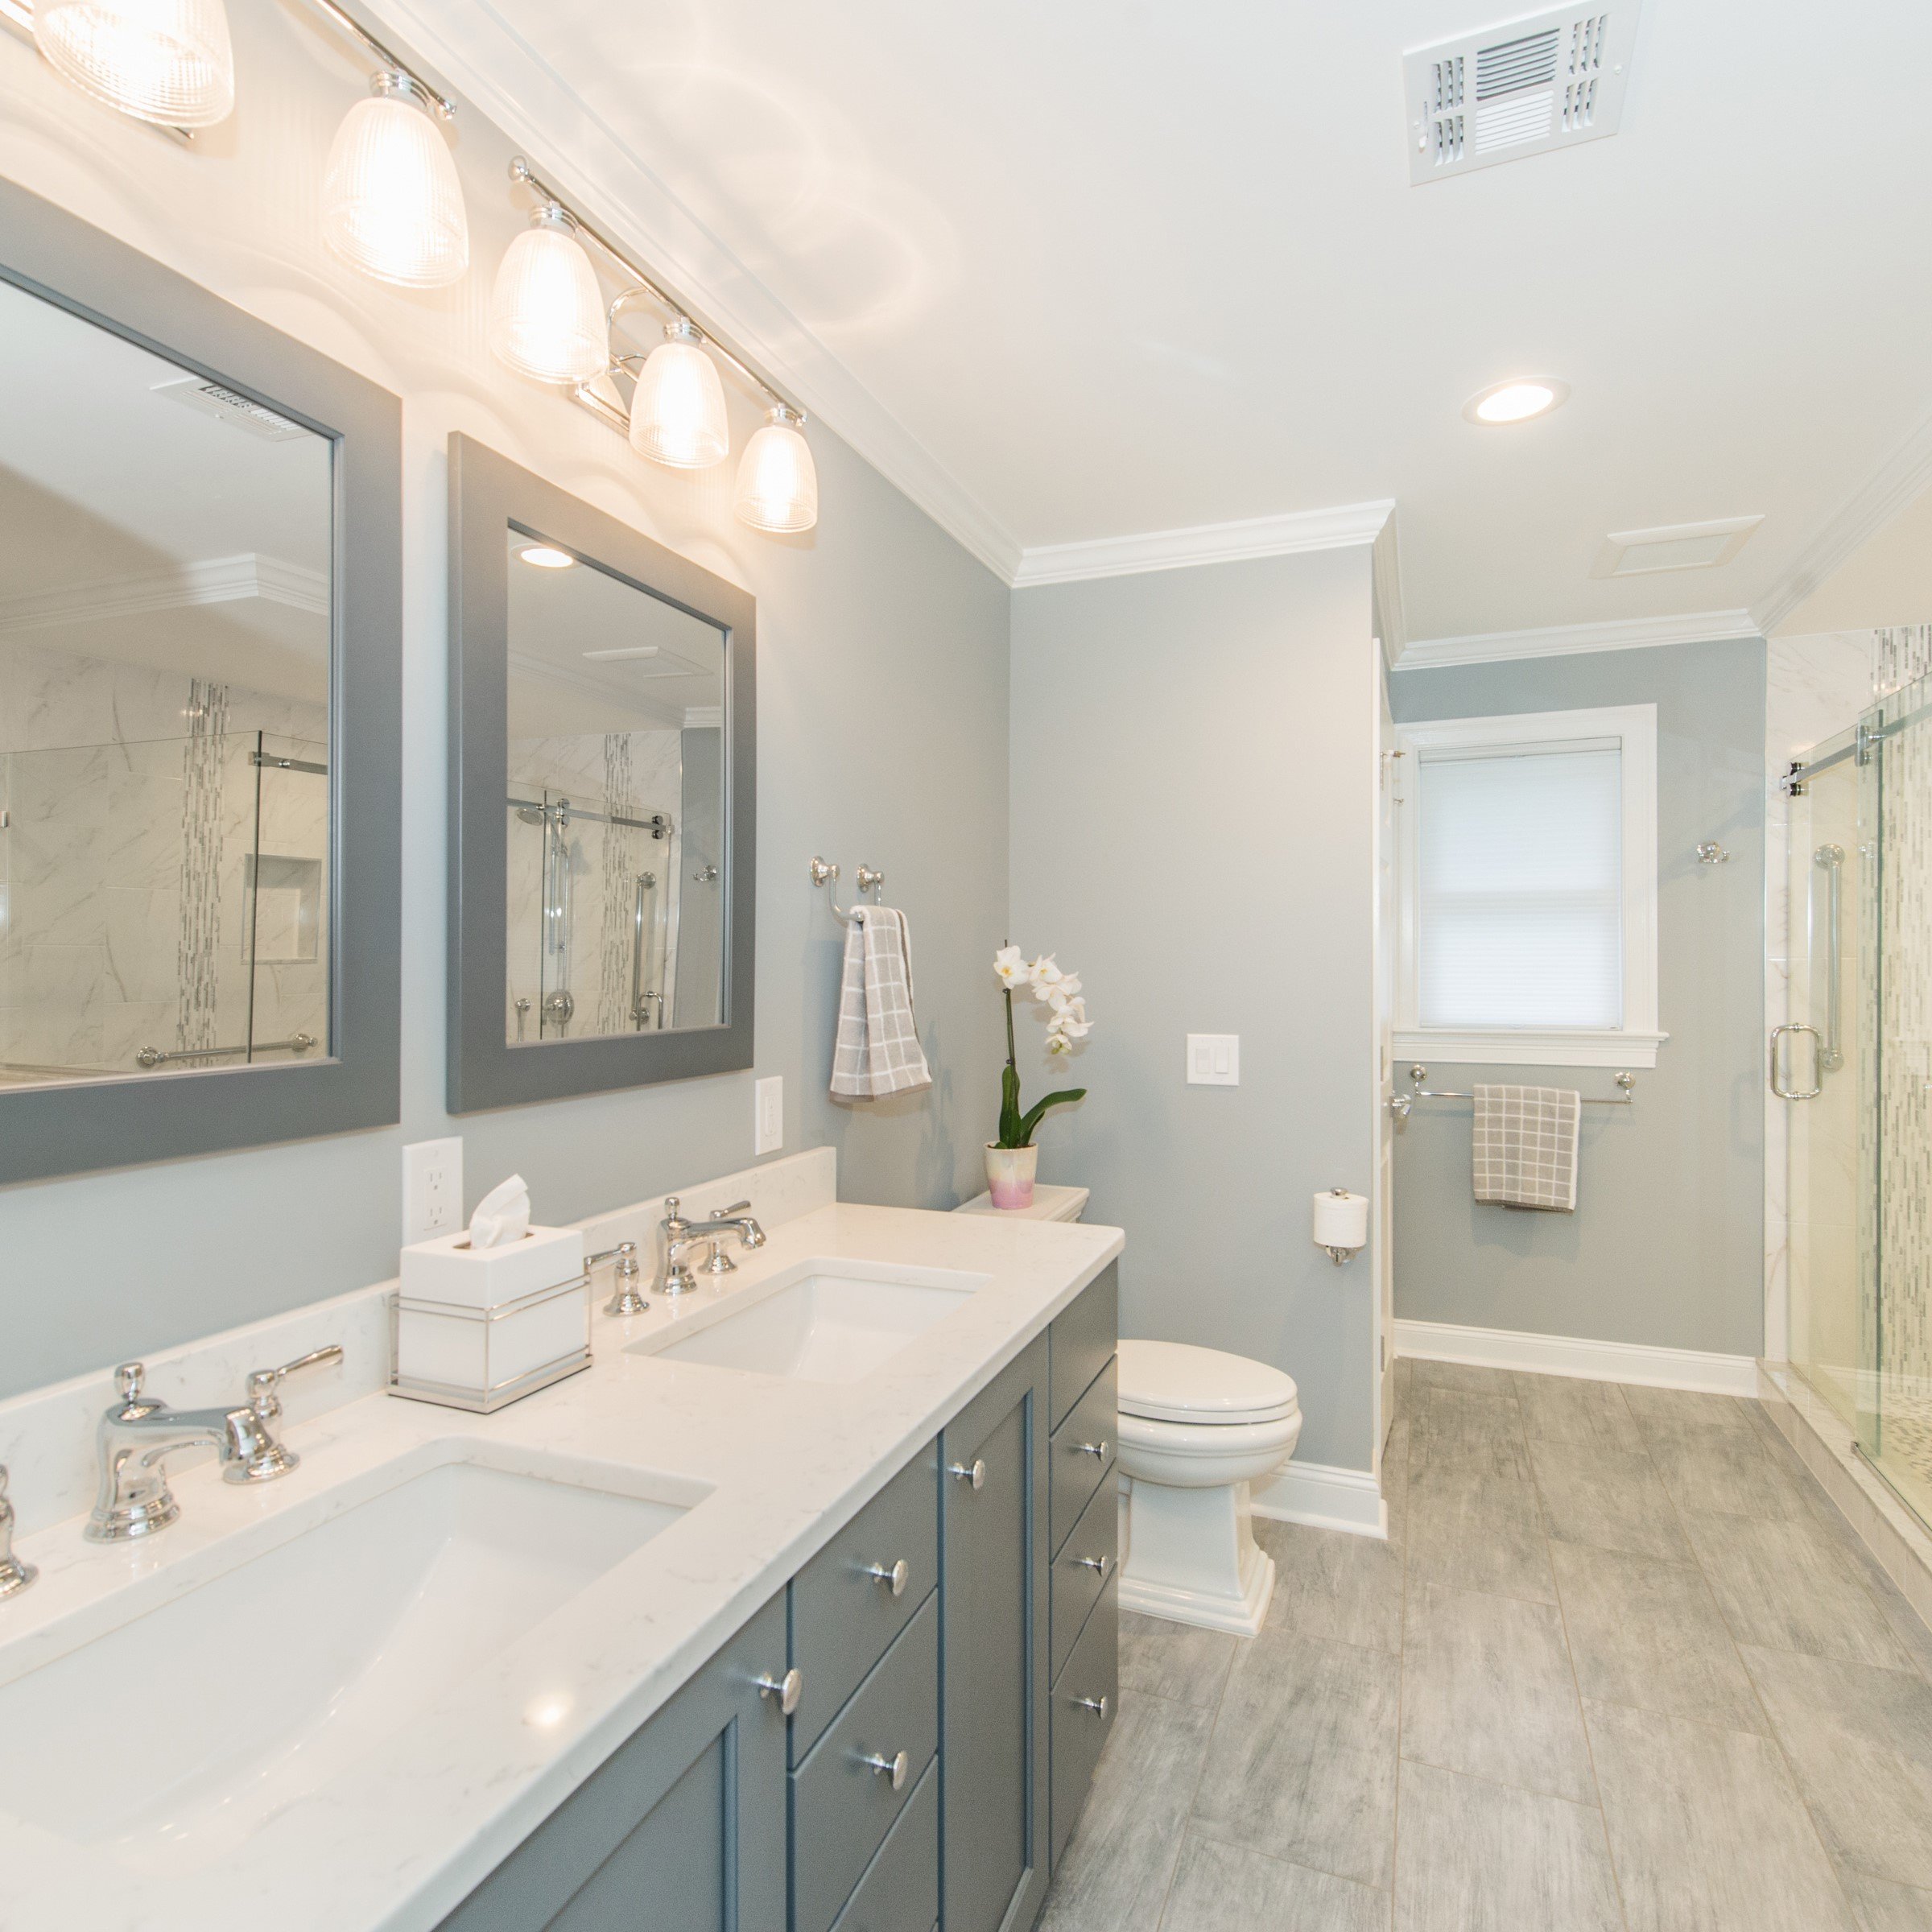 A Spacious Master with Large Marble Window in Shower & Hall Bath with Soaking Tub